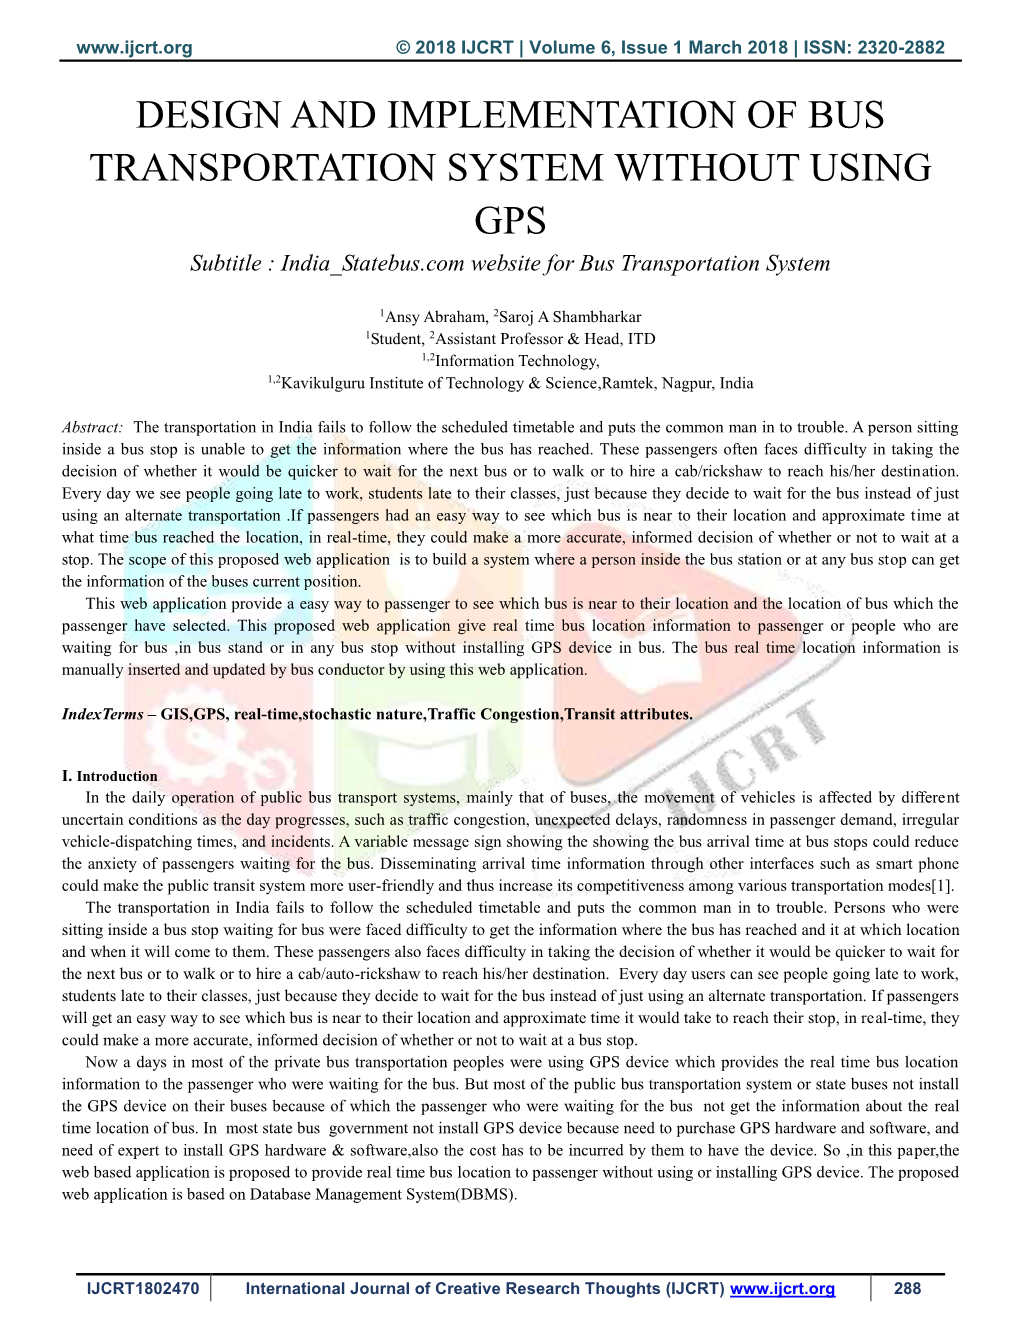 DESIGN and IMPLEMENTATION of BUS TRANSPORTATION SYSTEM WITHOUT USING GPS Subtitle : India Statebus.Com Website for Bus Transportation System